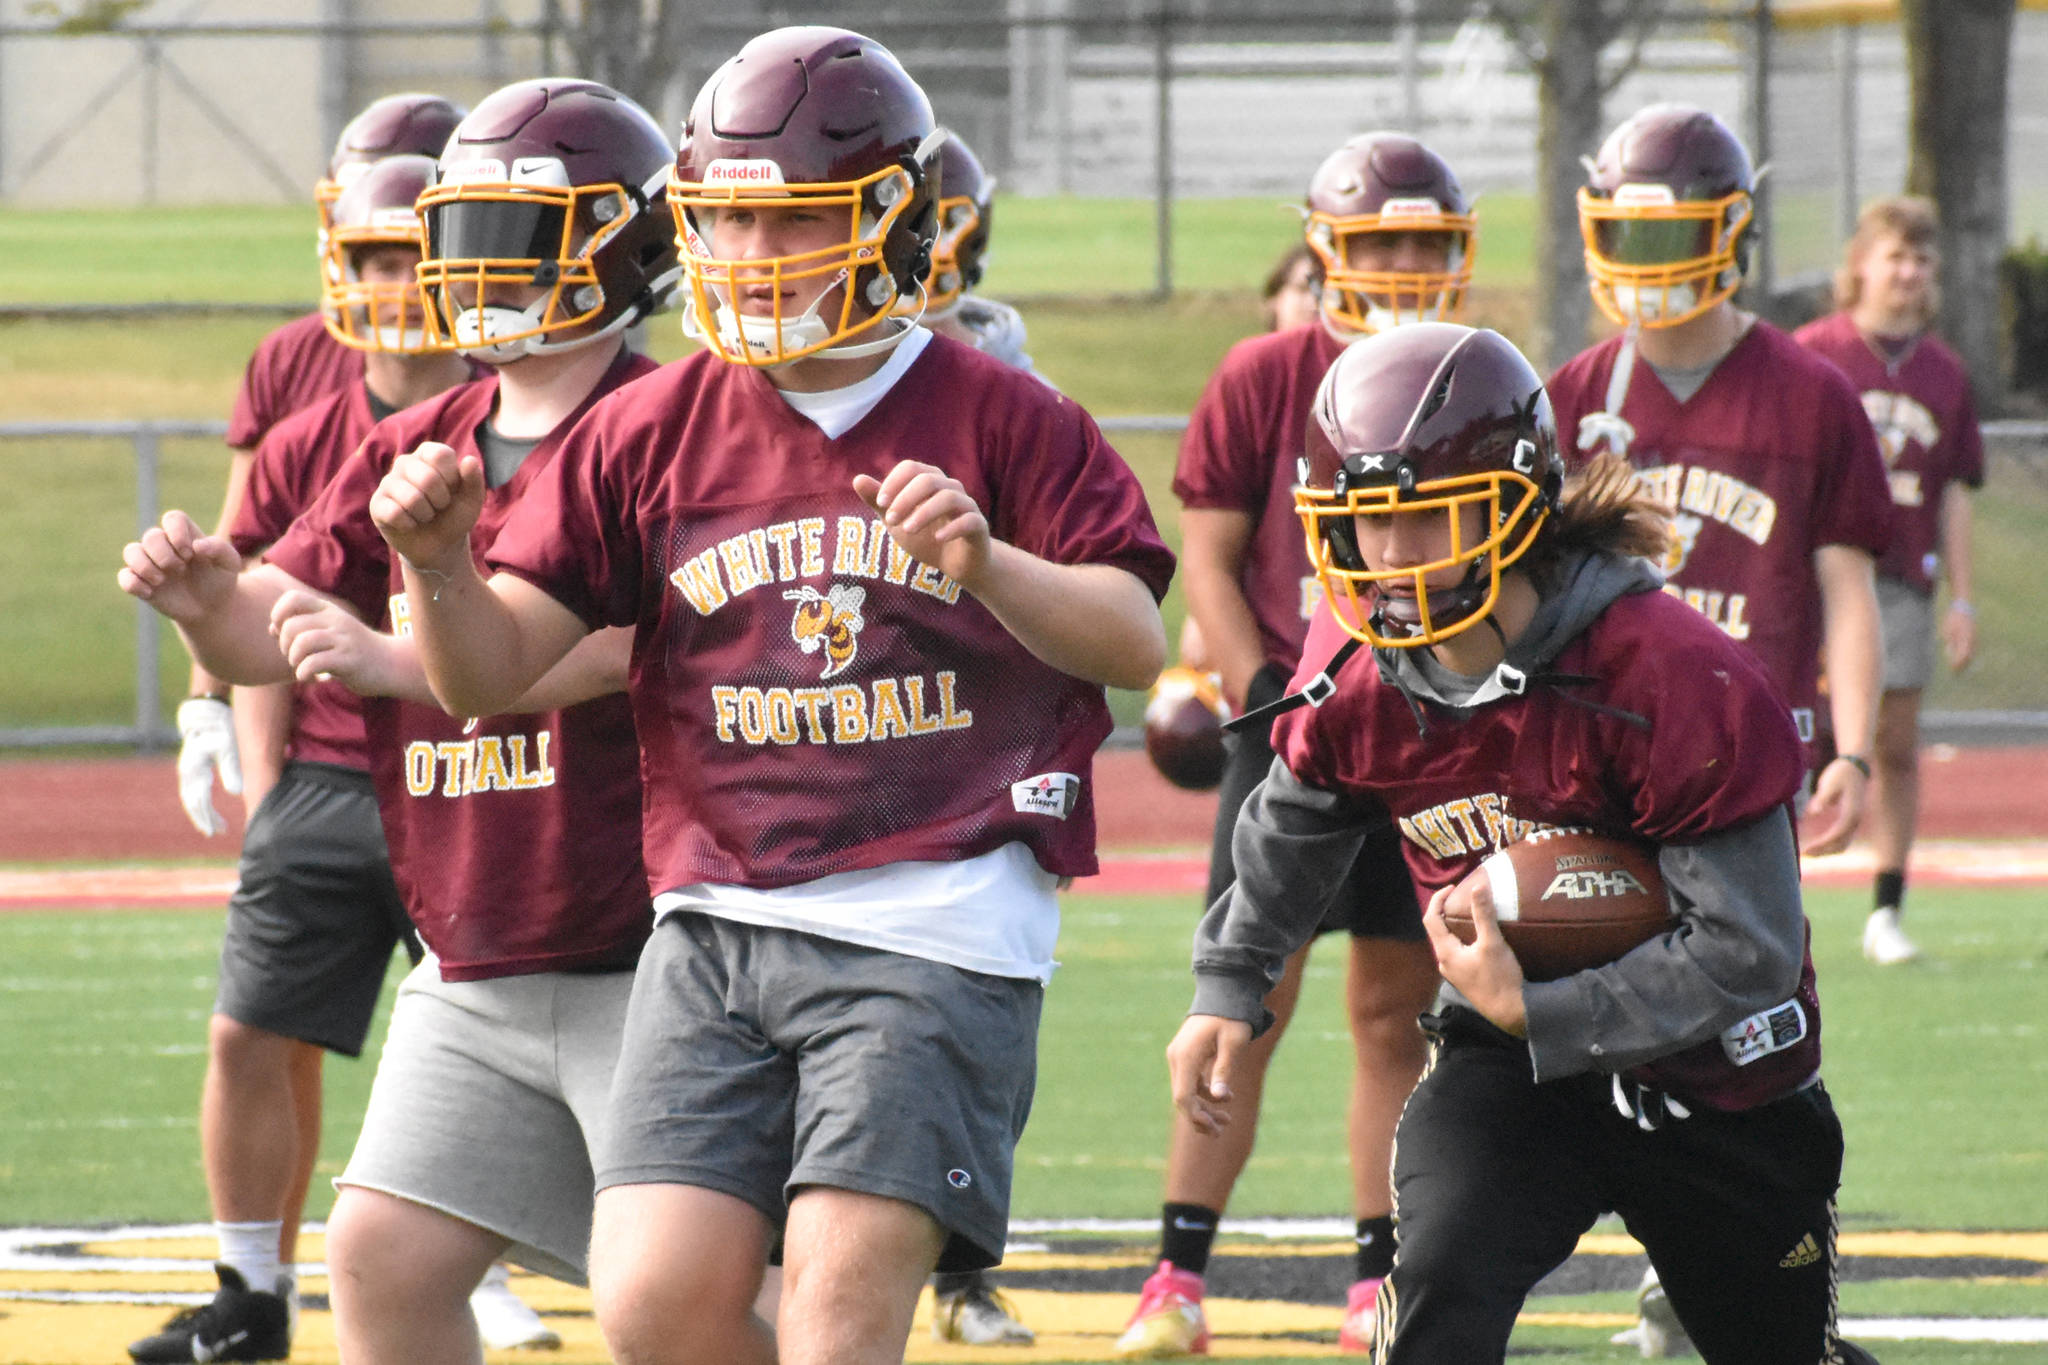 PHOTOS BY KEVIN HANSON Football teams at Enumclaw and White River have been practicing since Aug. 18, preparing for Friday’s season openers.